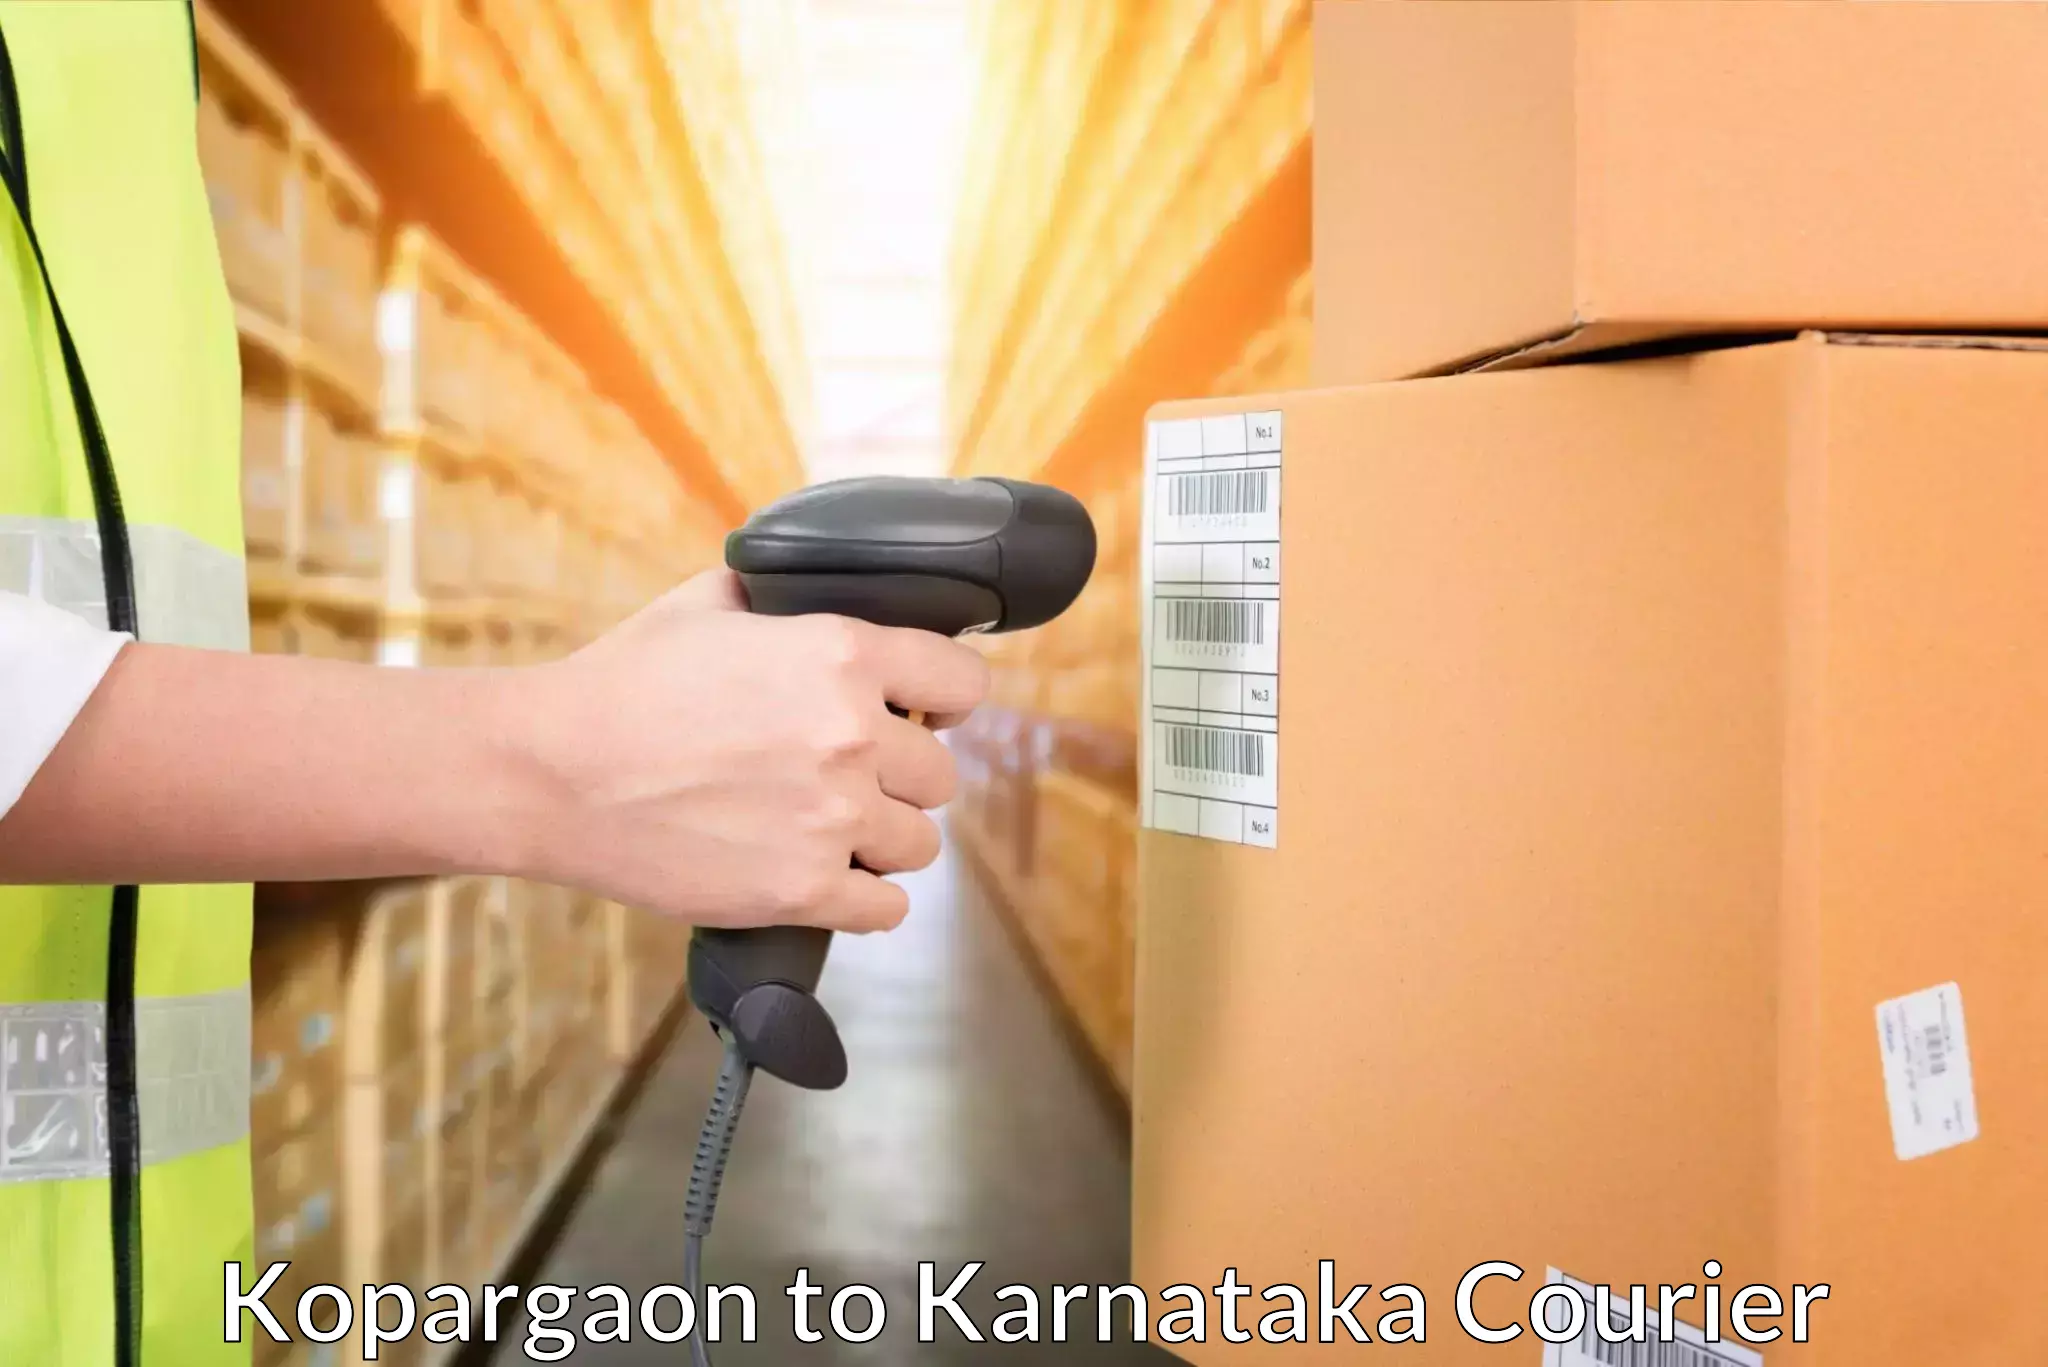 Global shipping solutions Kopargaon to Mangalore Port